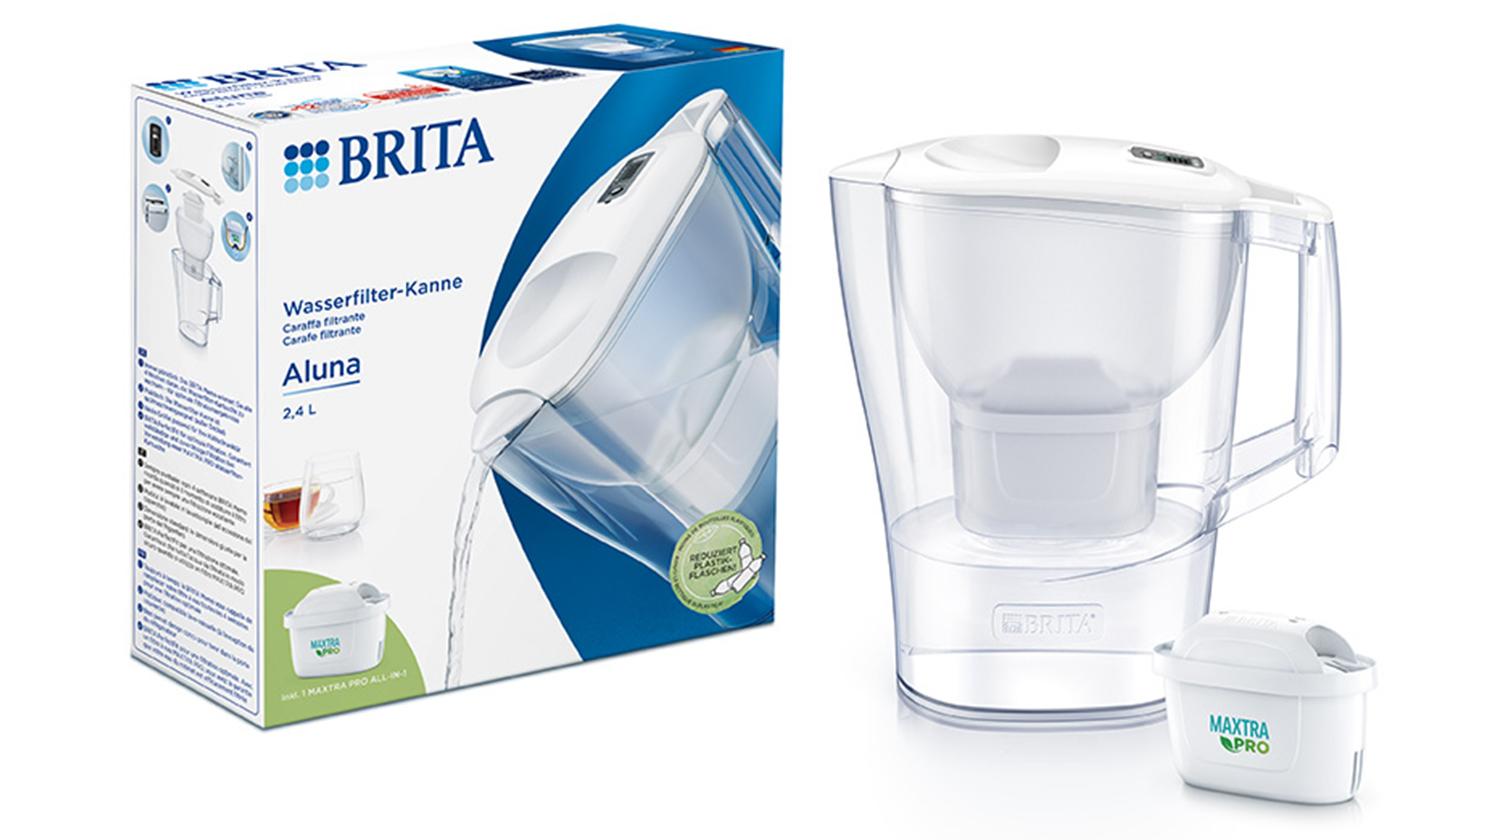 BRITA MAXTRA + Replacement Water Filter Cartridges, Compatible with all  BRITA Jugs - Reduce Chlorine, Limescale and Impurities for Great Taste -  Pack